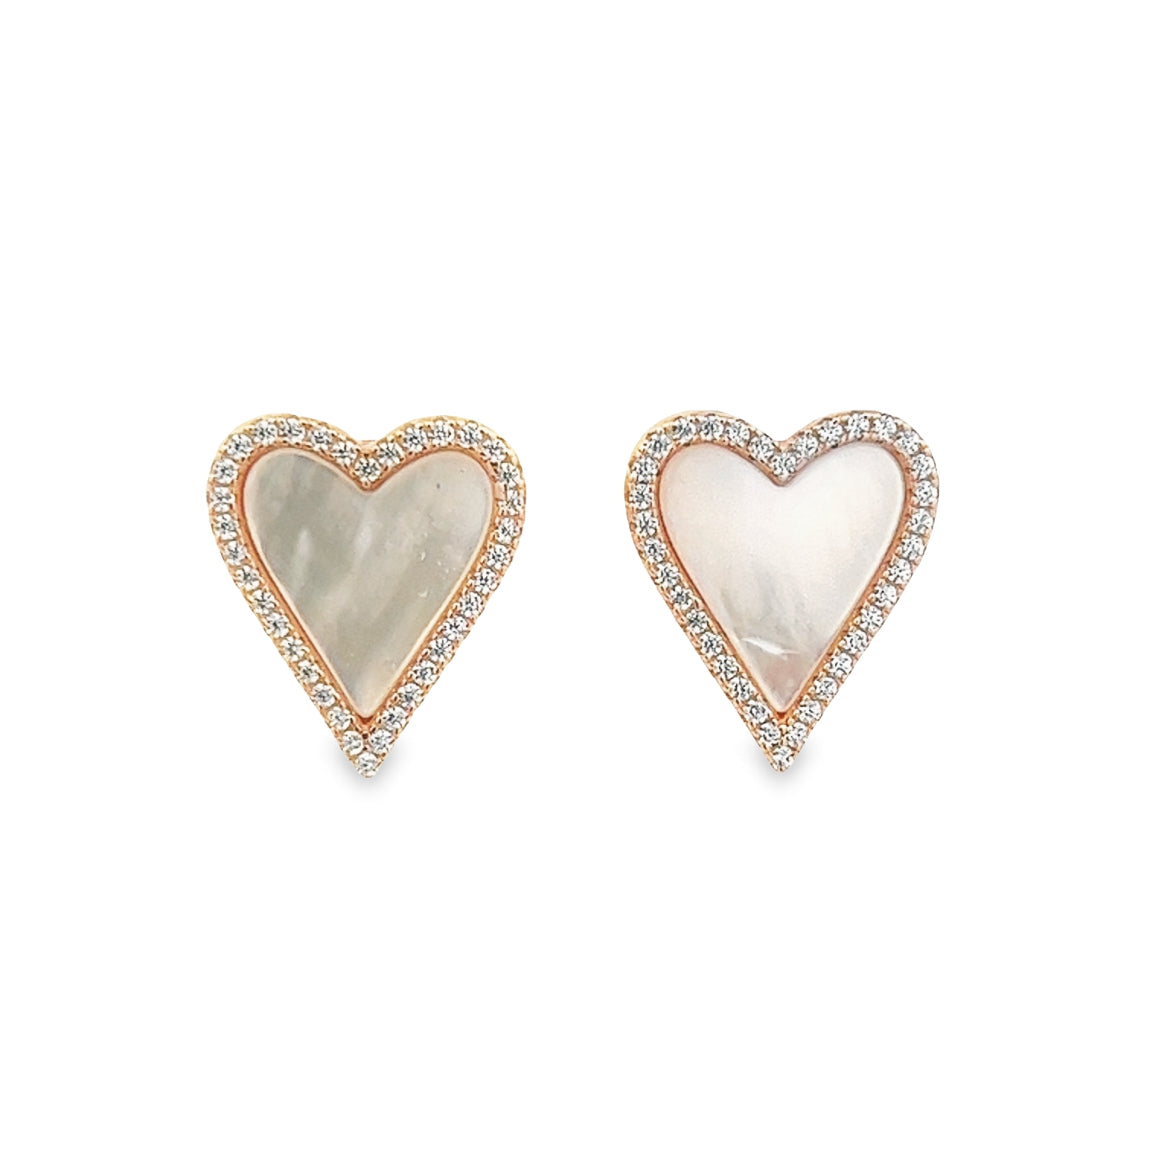 925 SILVER ROSE GOLD MOTHER OF PEARL HEART STUD EARRINGS